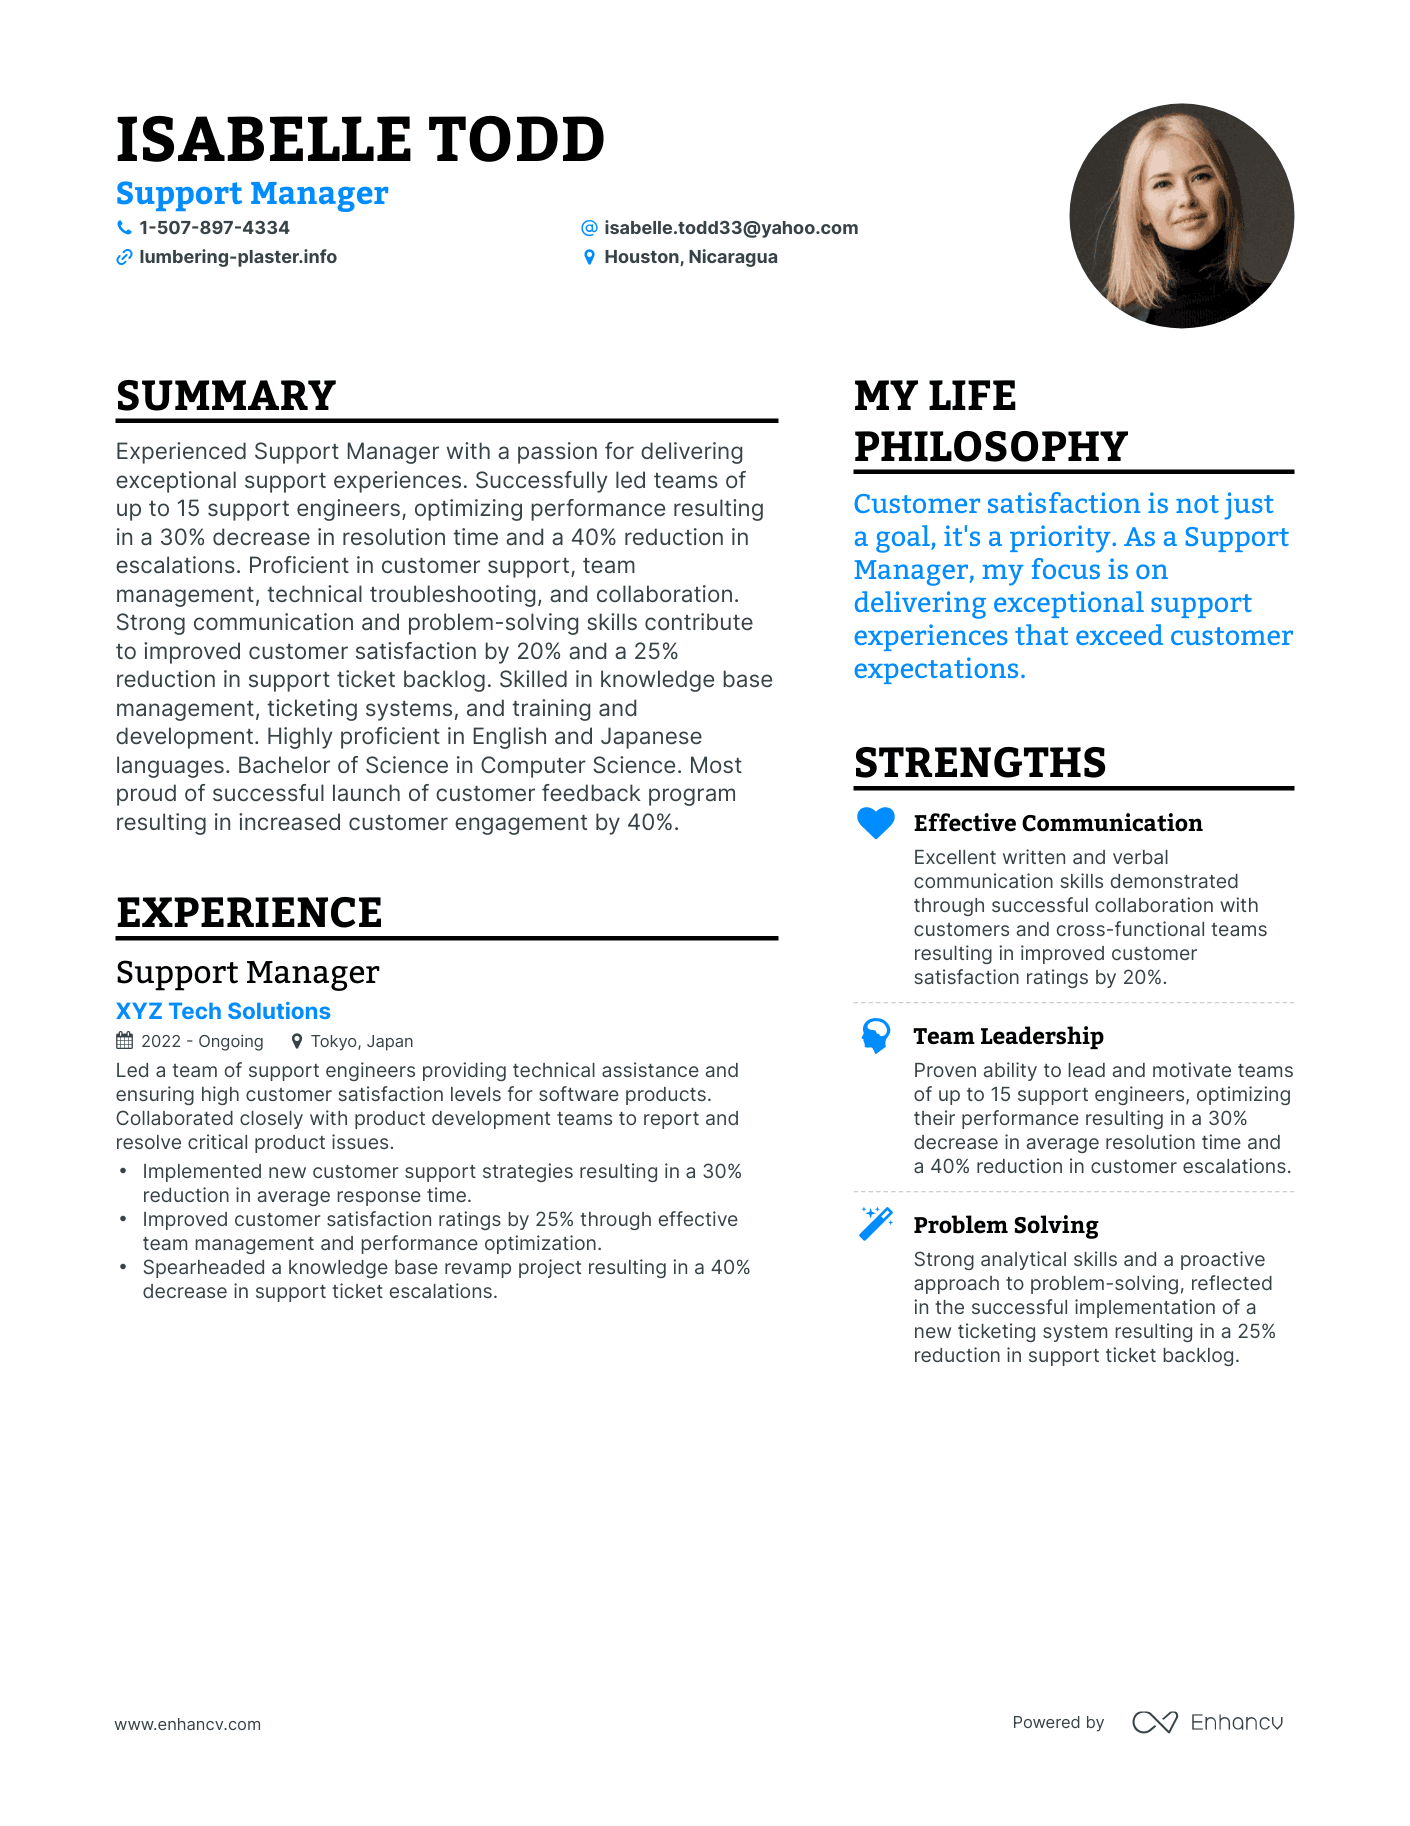 Support Manager resume example